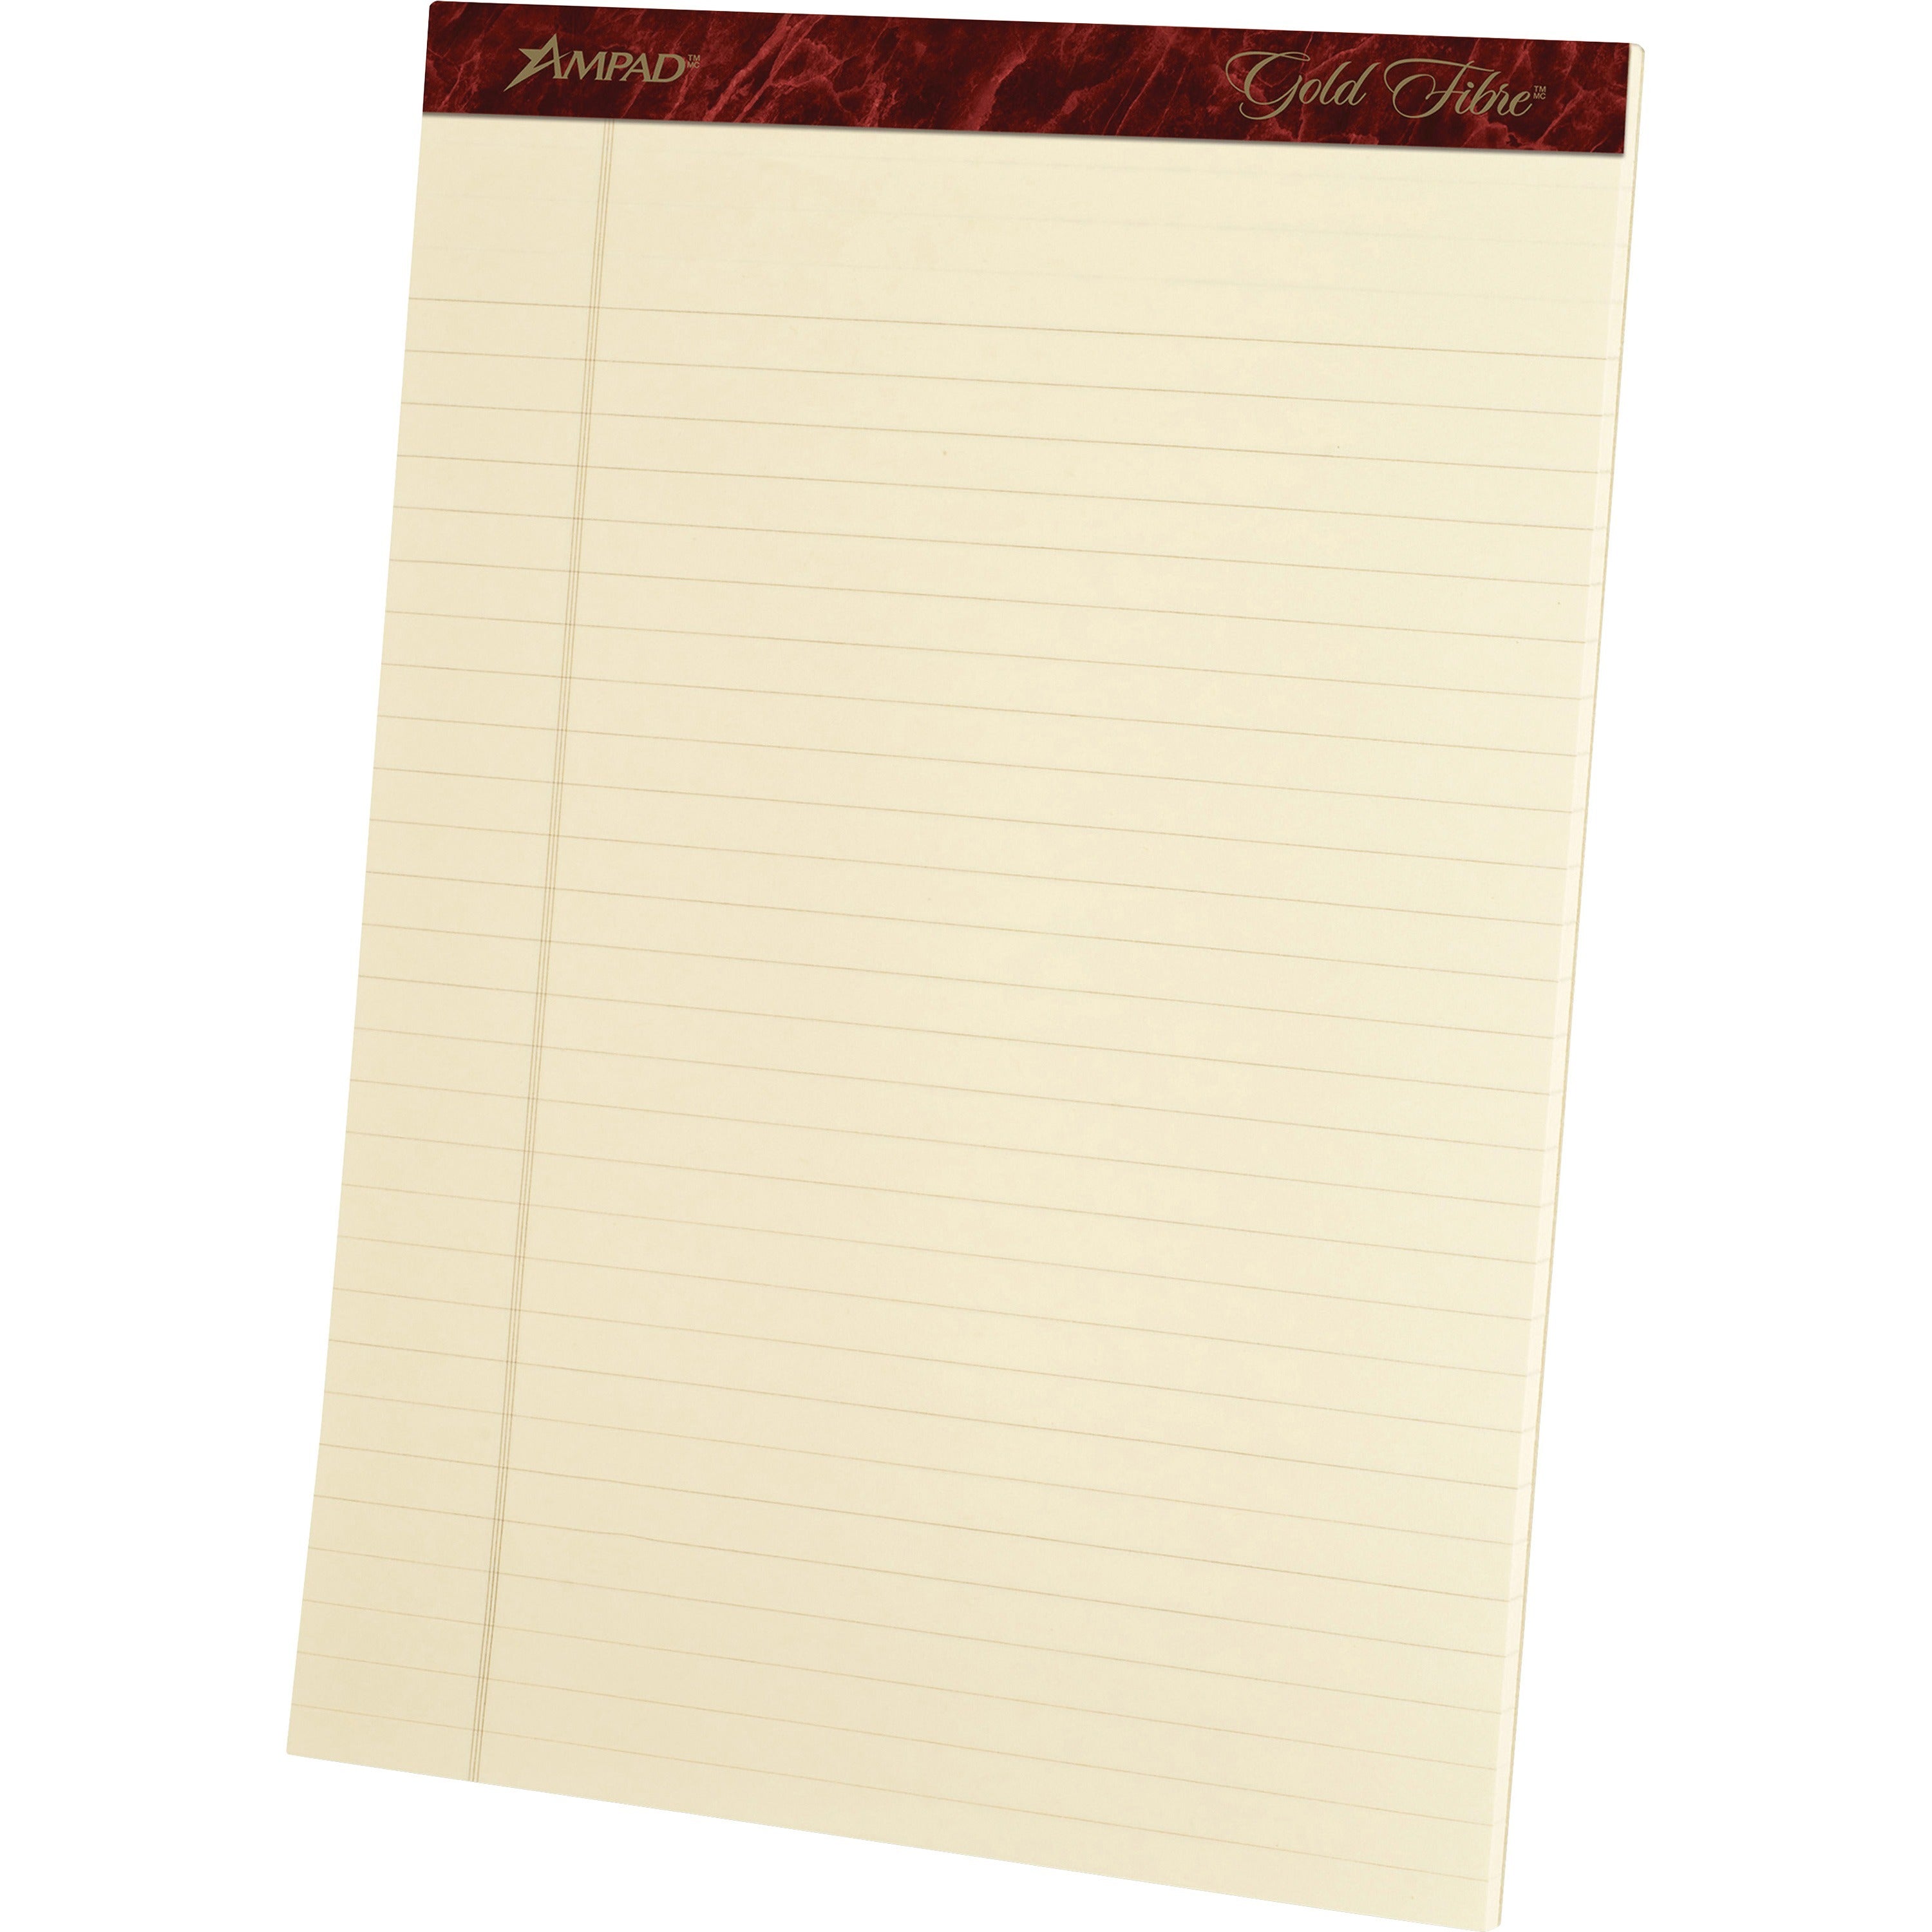 Ampad Gold Fibre Legal Rule Retro Writing Pads - 50 Sheets - Wire Bound - 0.34" Ruled - 20 lb Basis Weight - 8 1/2" x 11 3/4" - Ivory Paper - Micro Perforated, Easy Tear, Chipboard Backing, Heavyweight - 4 / Pack - 